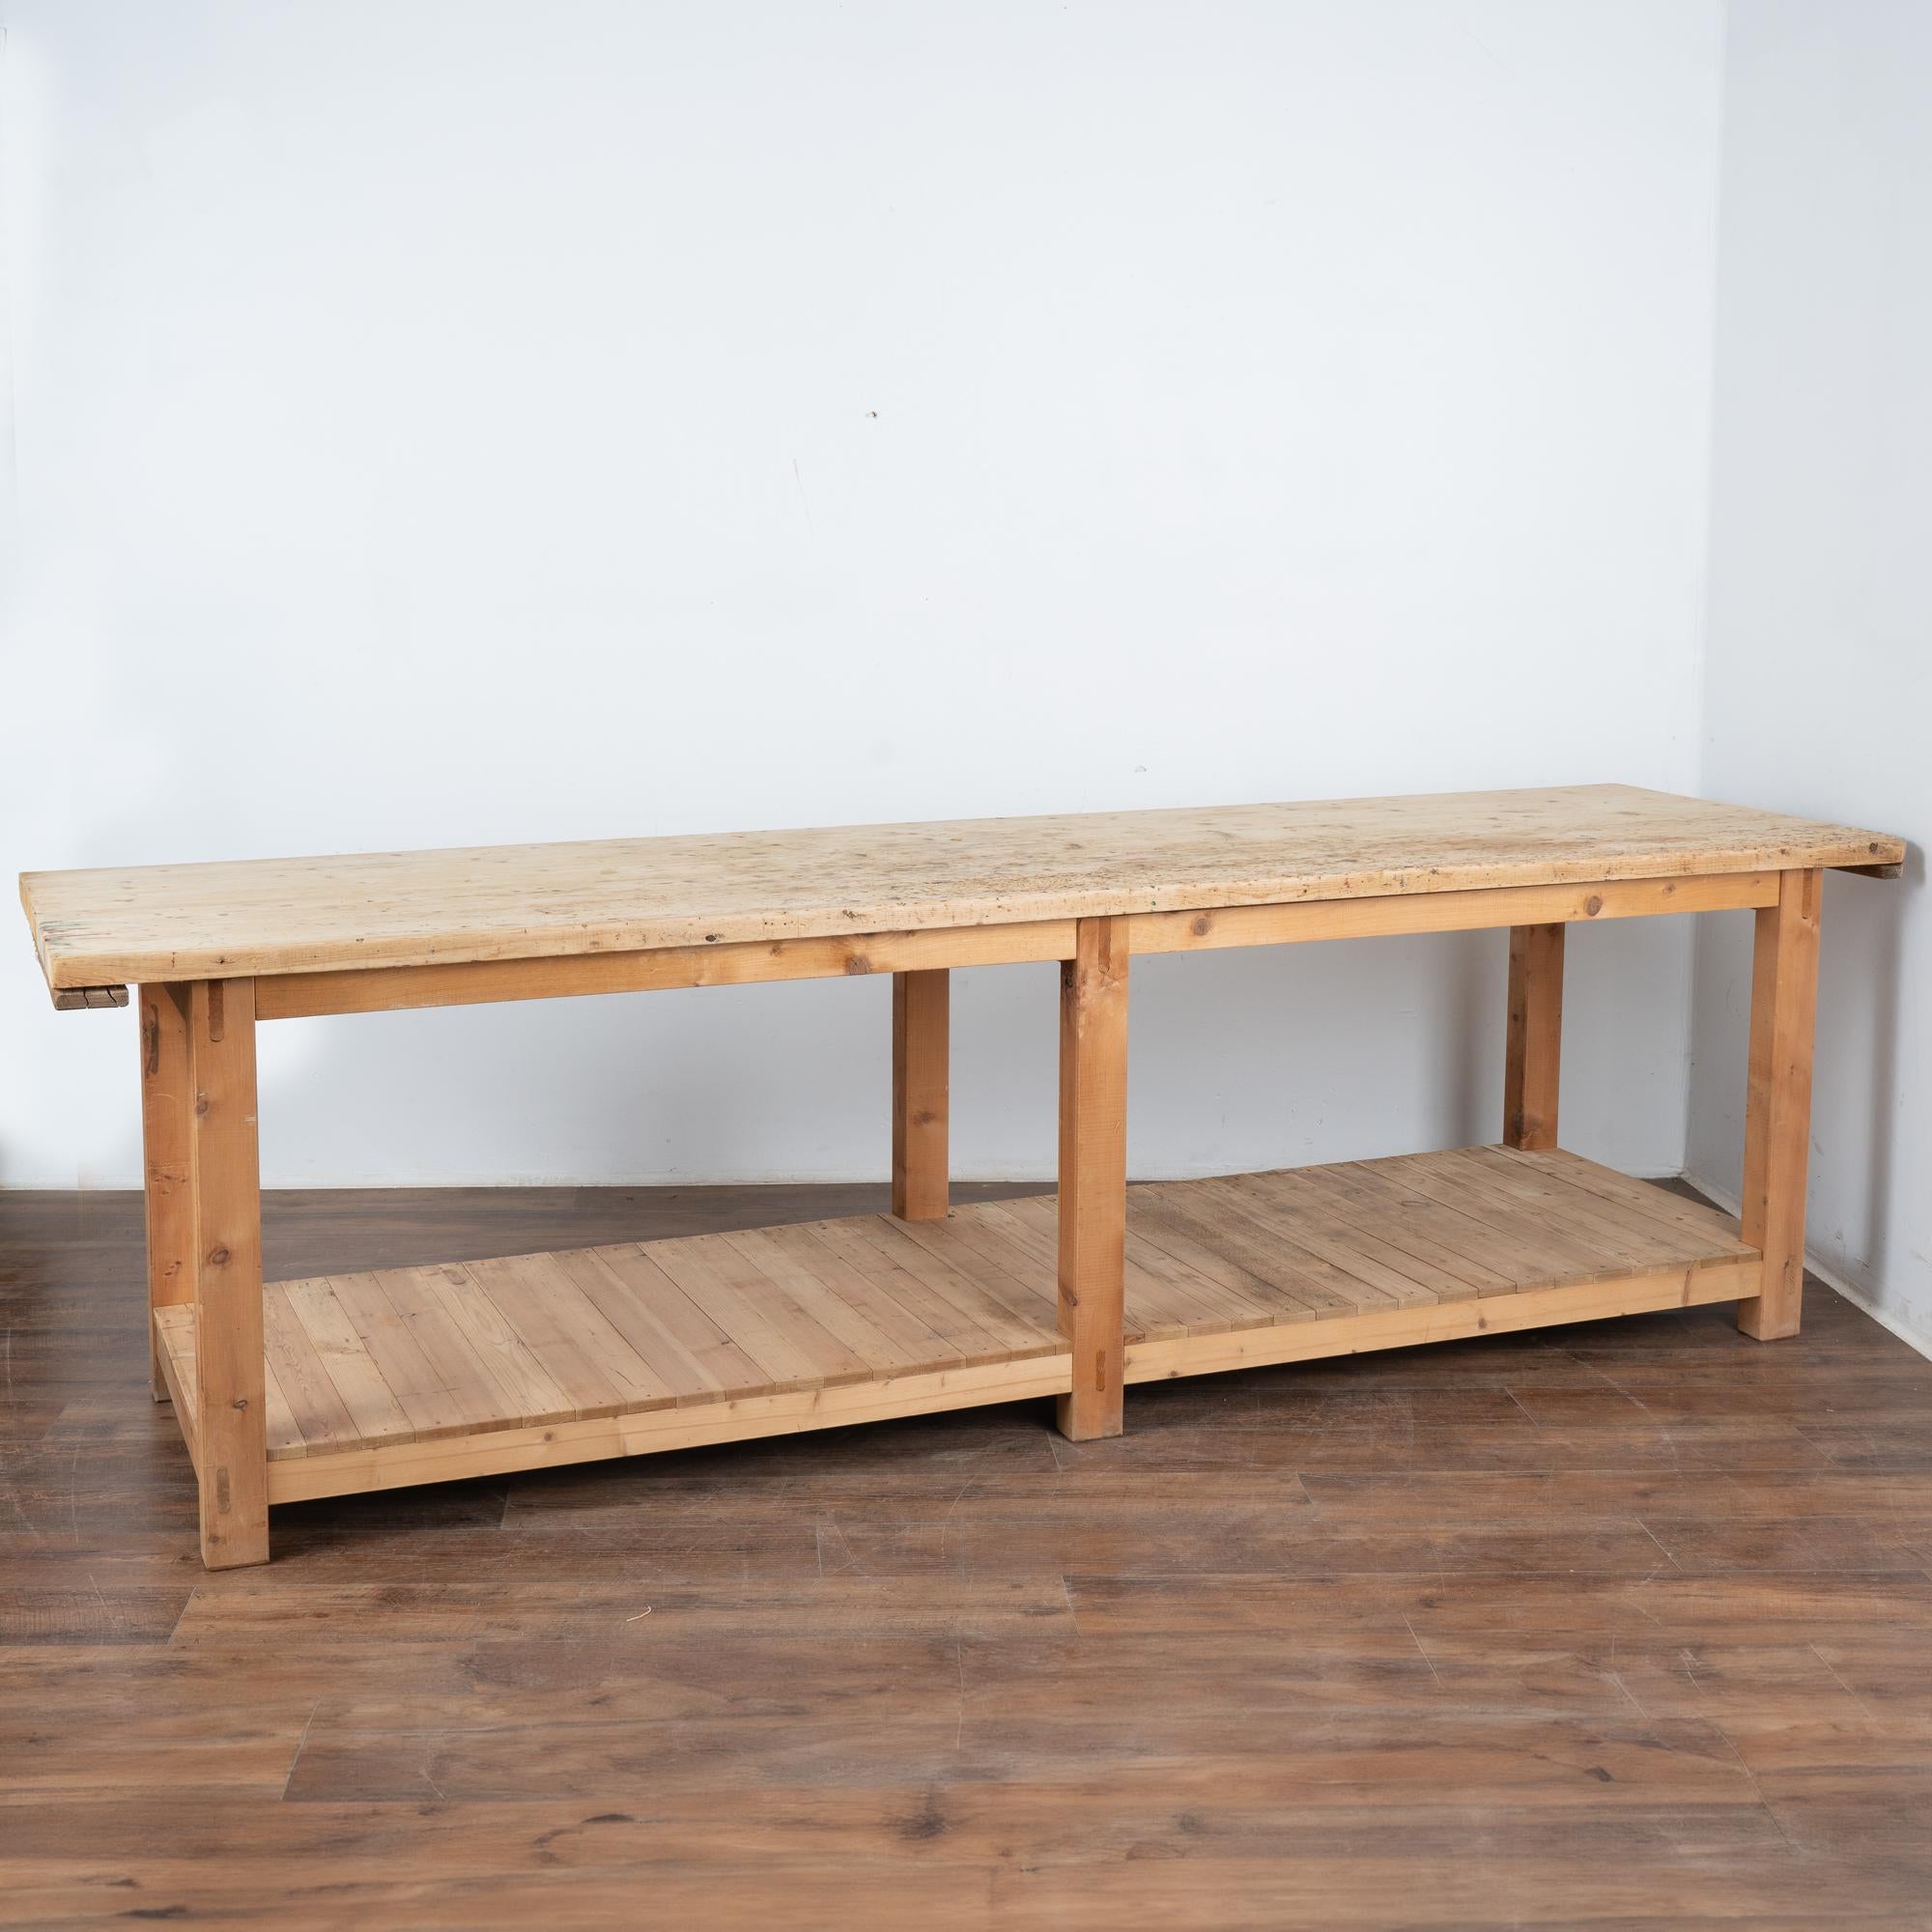 Rustic 10' Long Work Table Kitchen Island With Shelf, Hungary circa 1900 For Sale 10